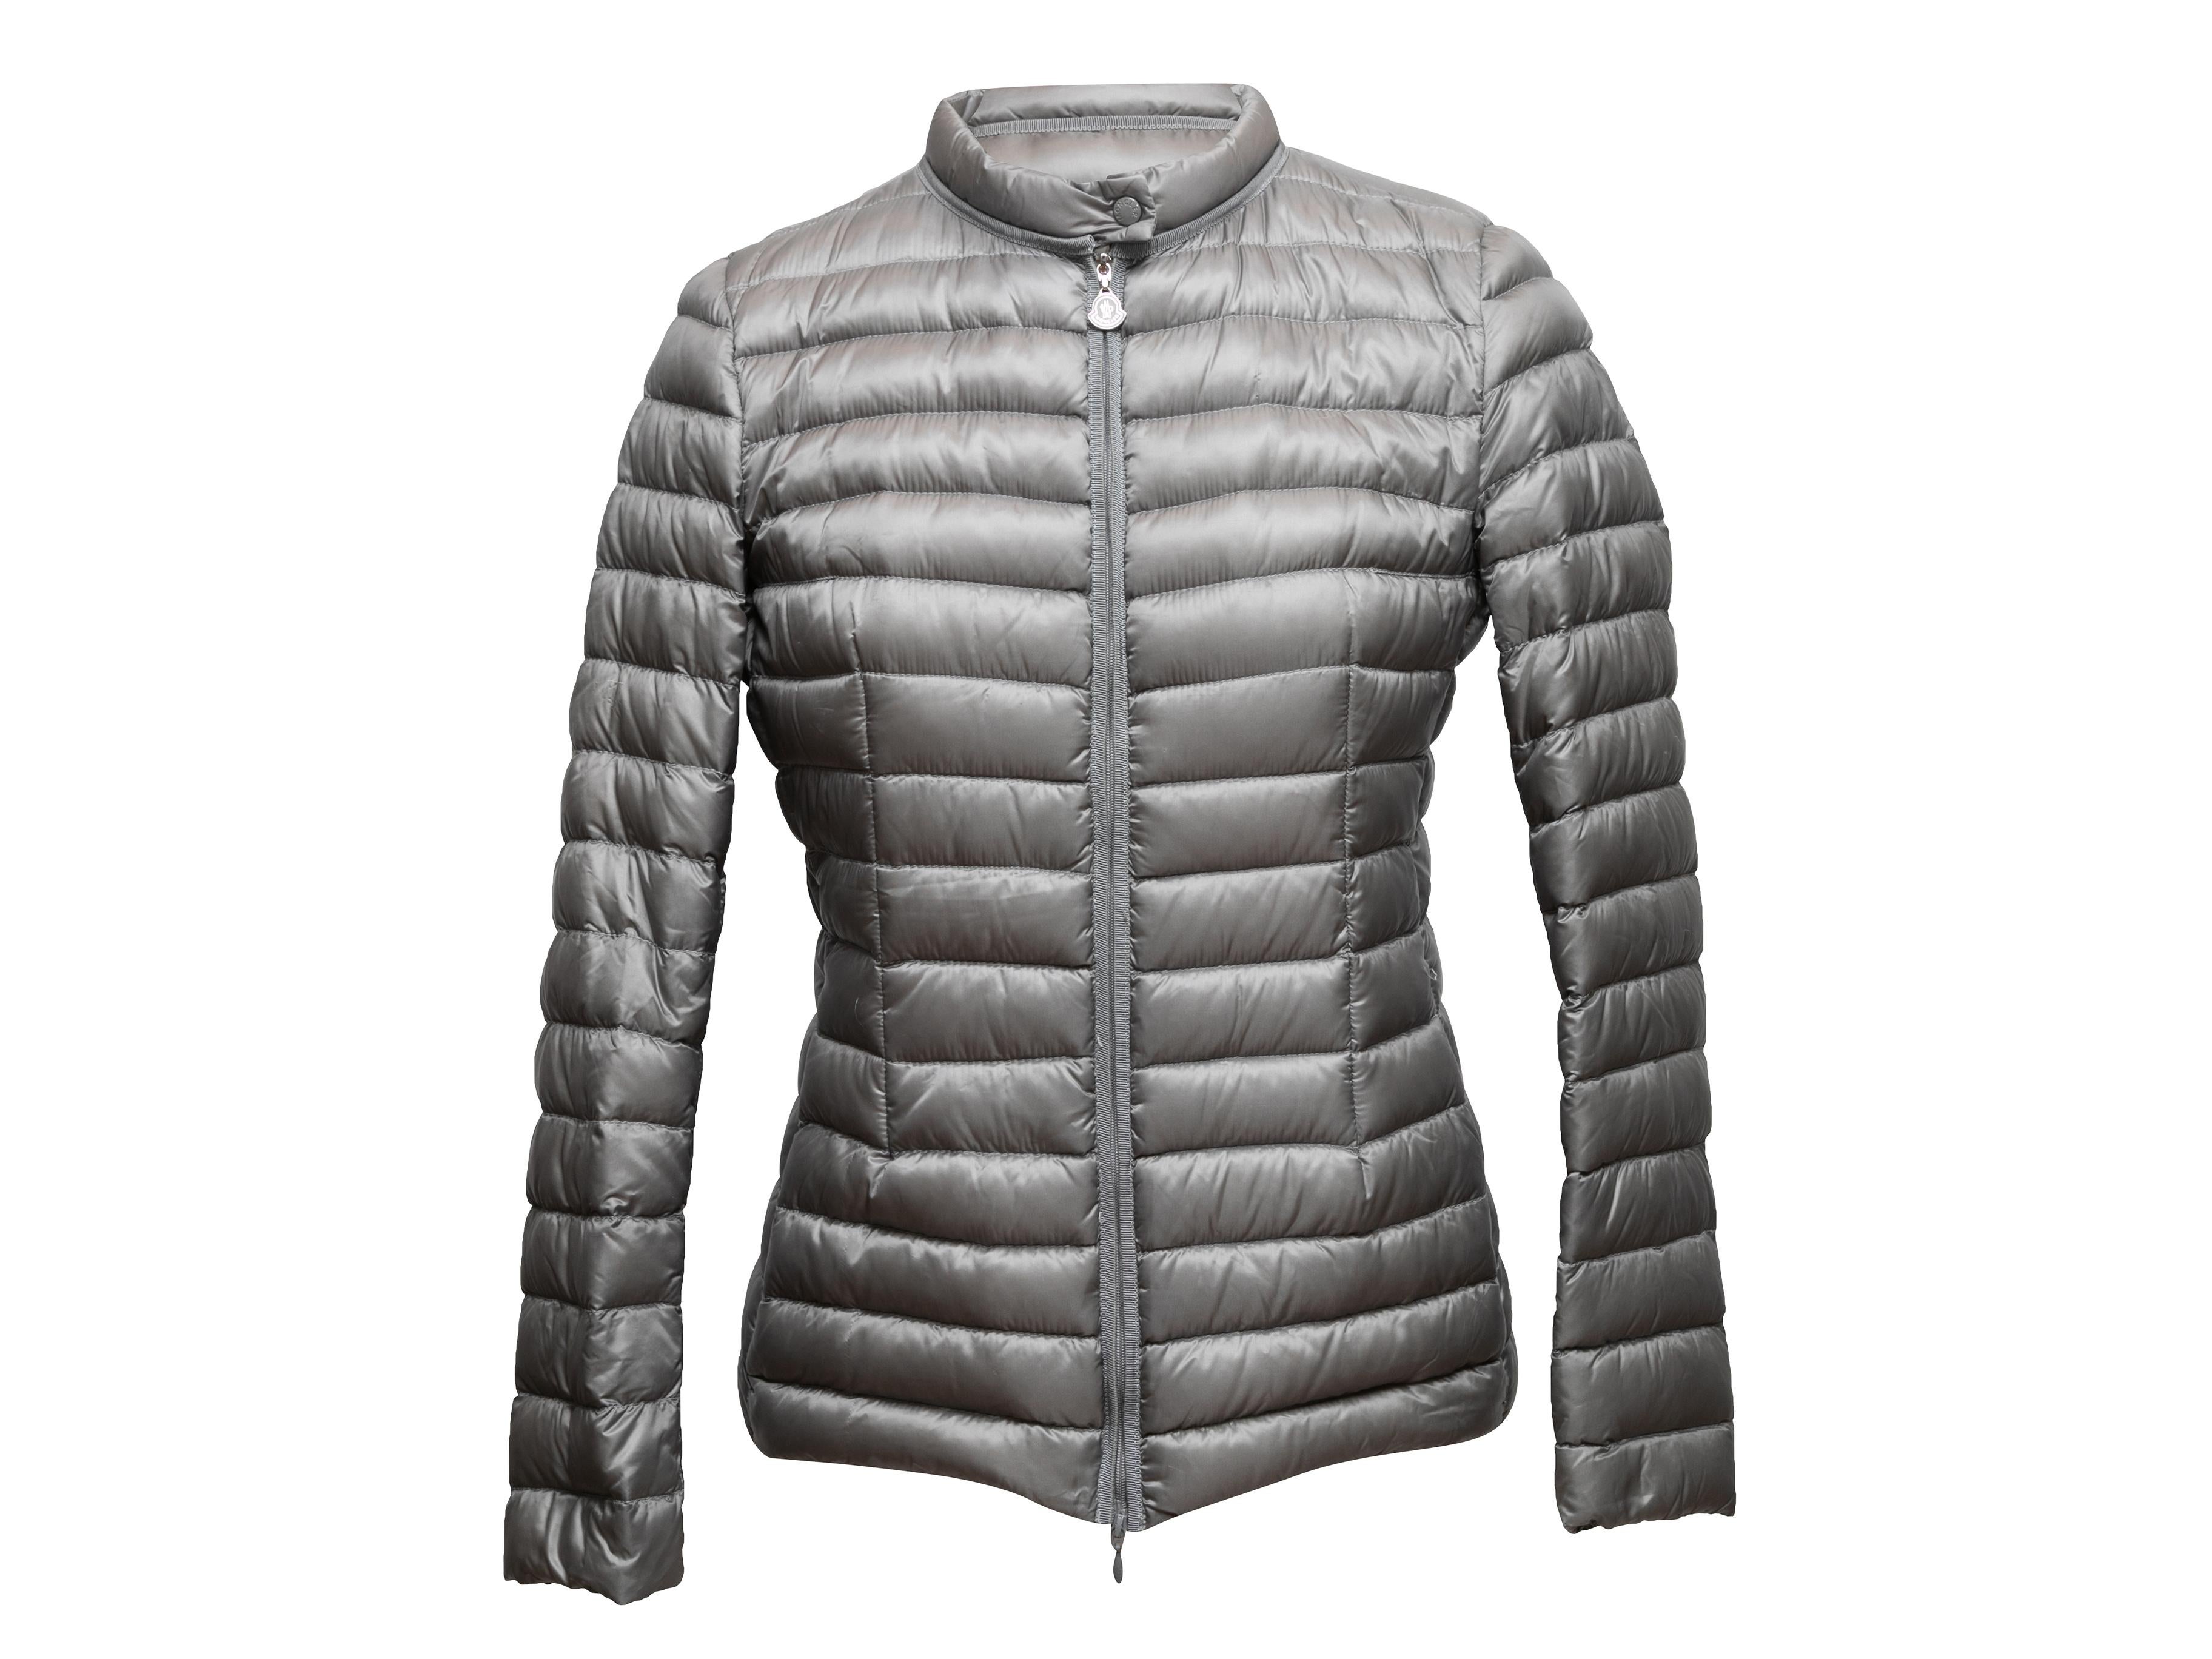 Grey down puffer jacket by Moncler. Crew neck. Zip closure at center front. 32